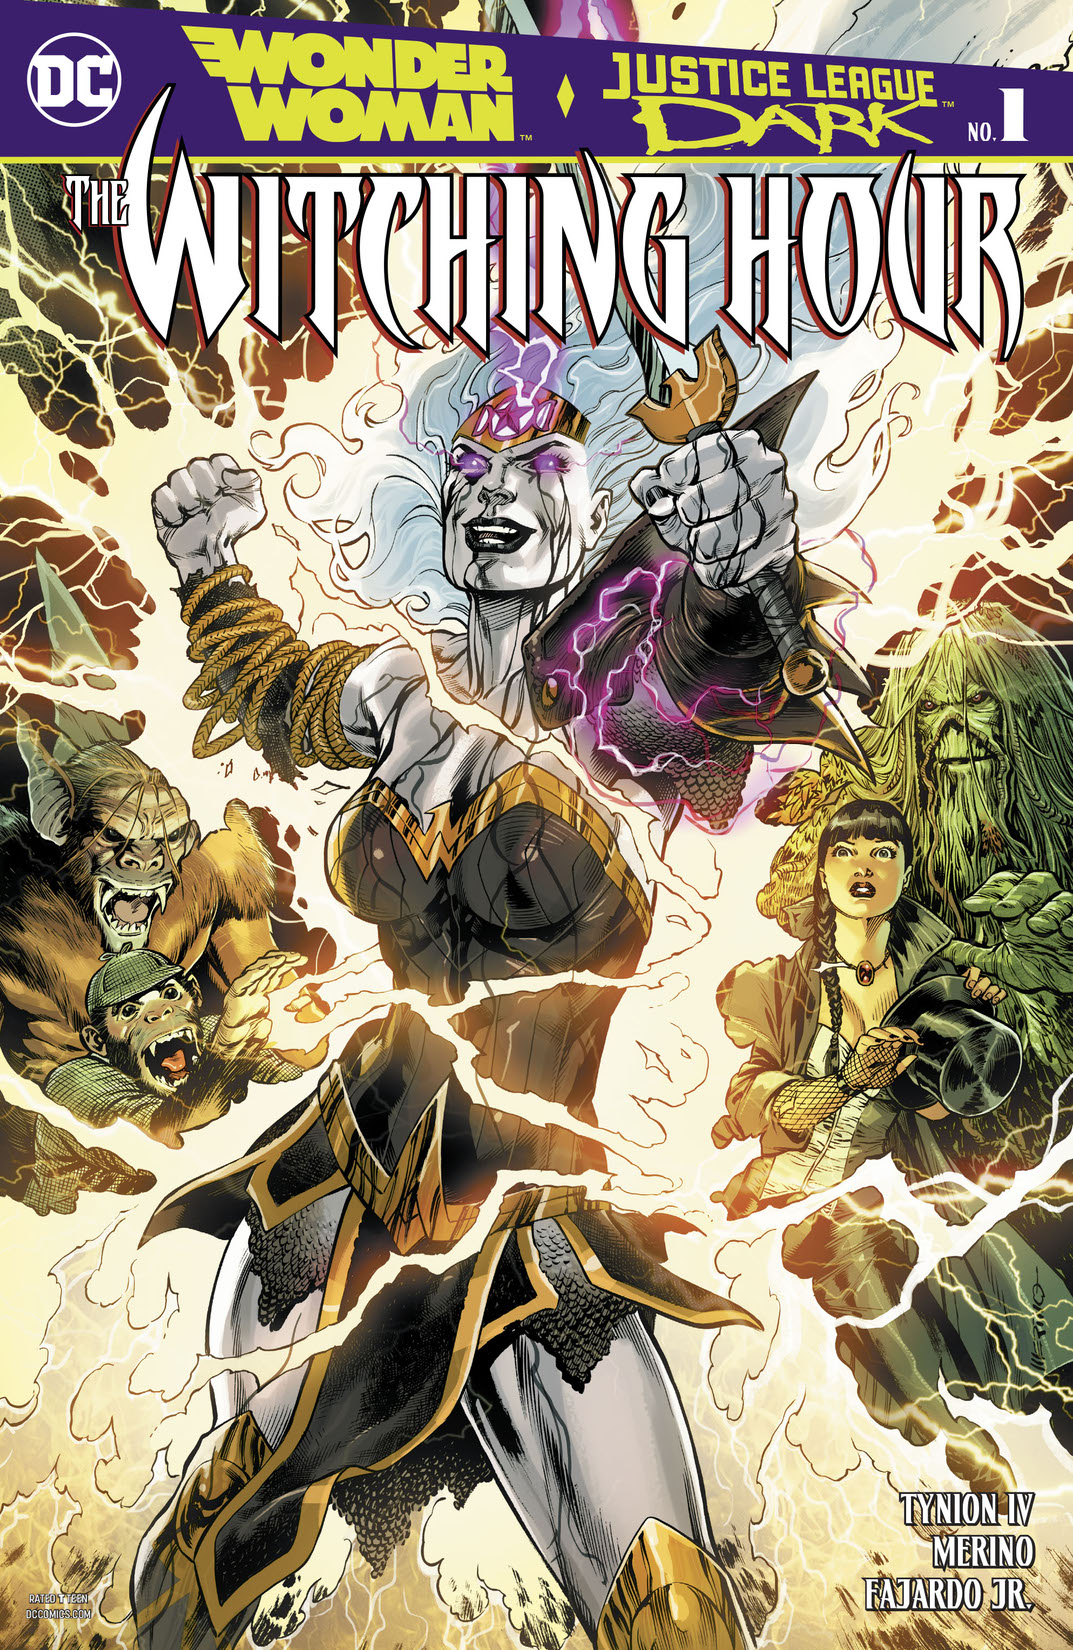 Wonder Woman and Justice League Dark: The Witching Hour (2018-) #1 preview images